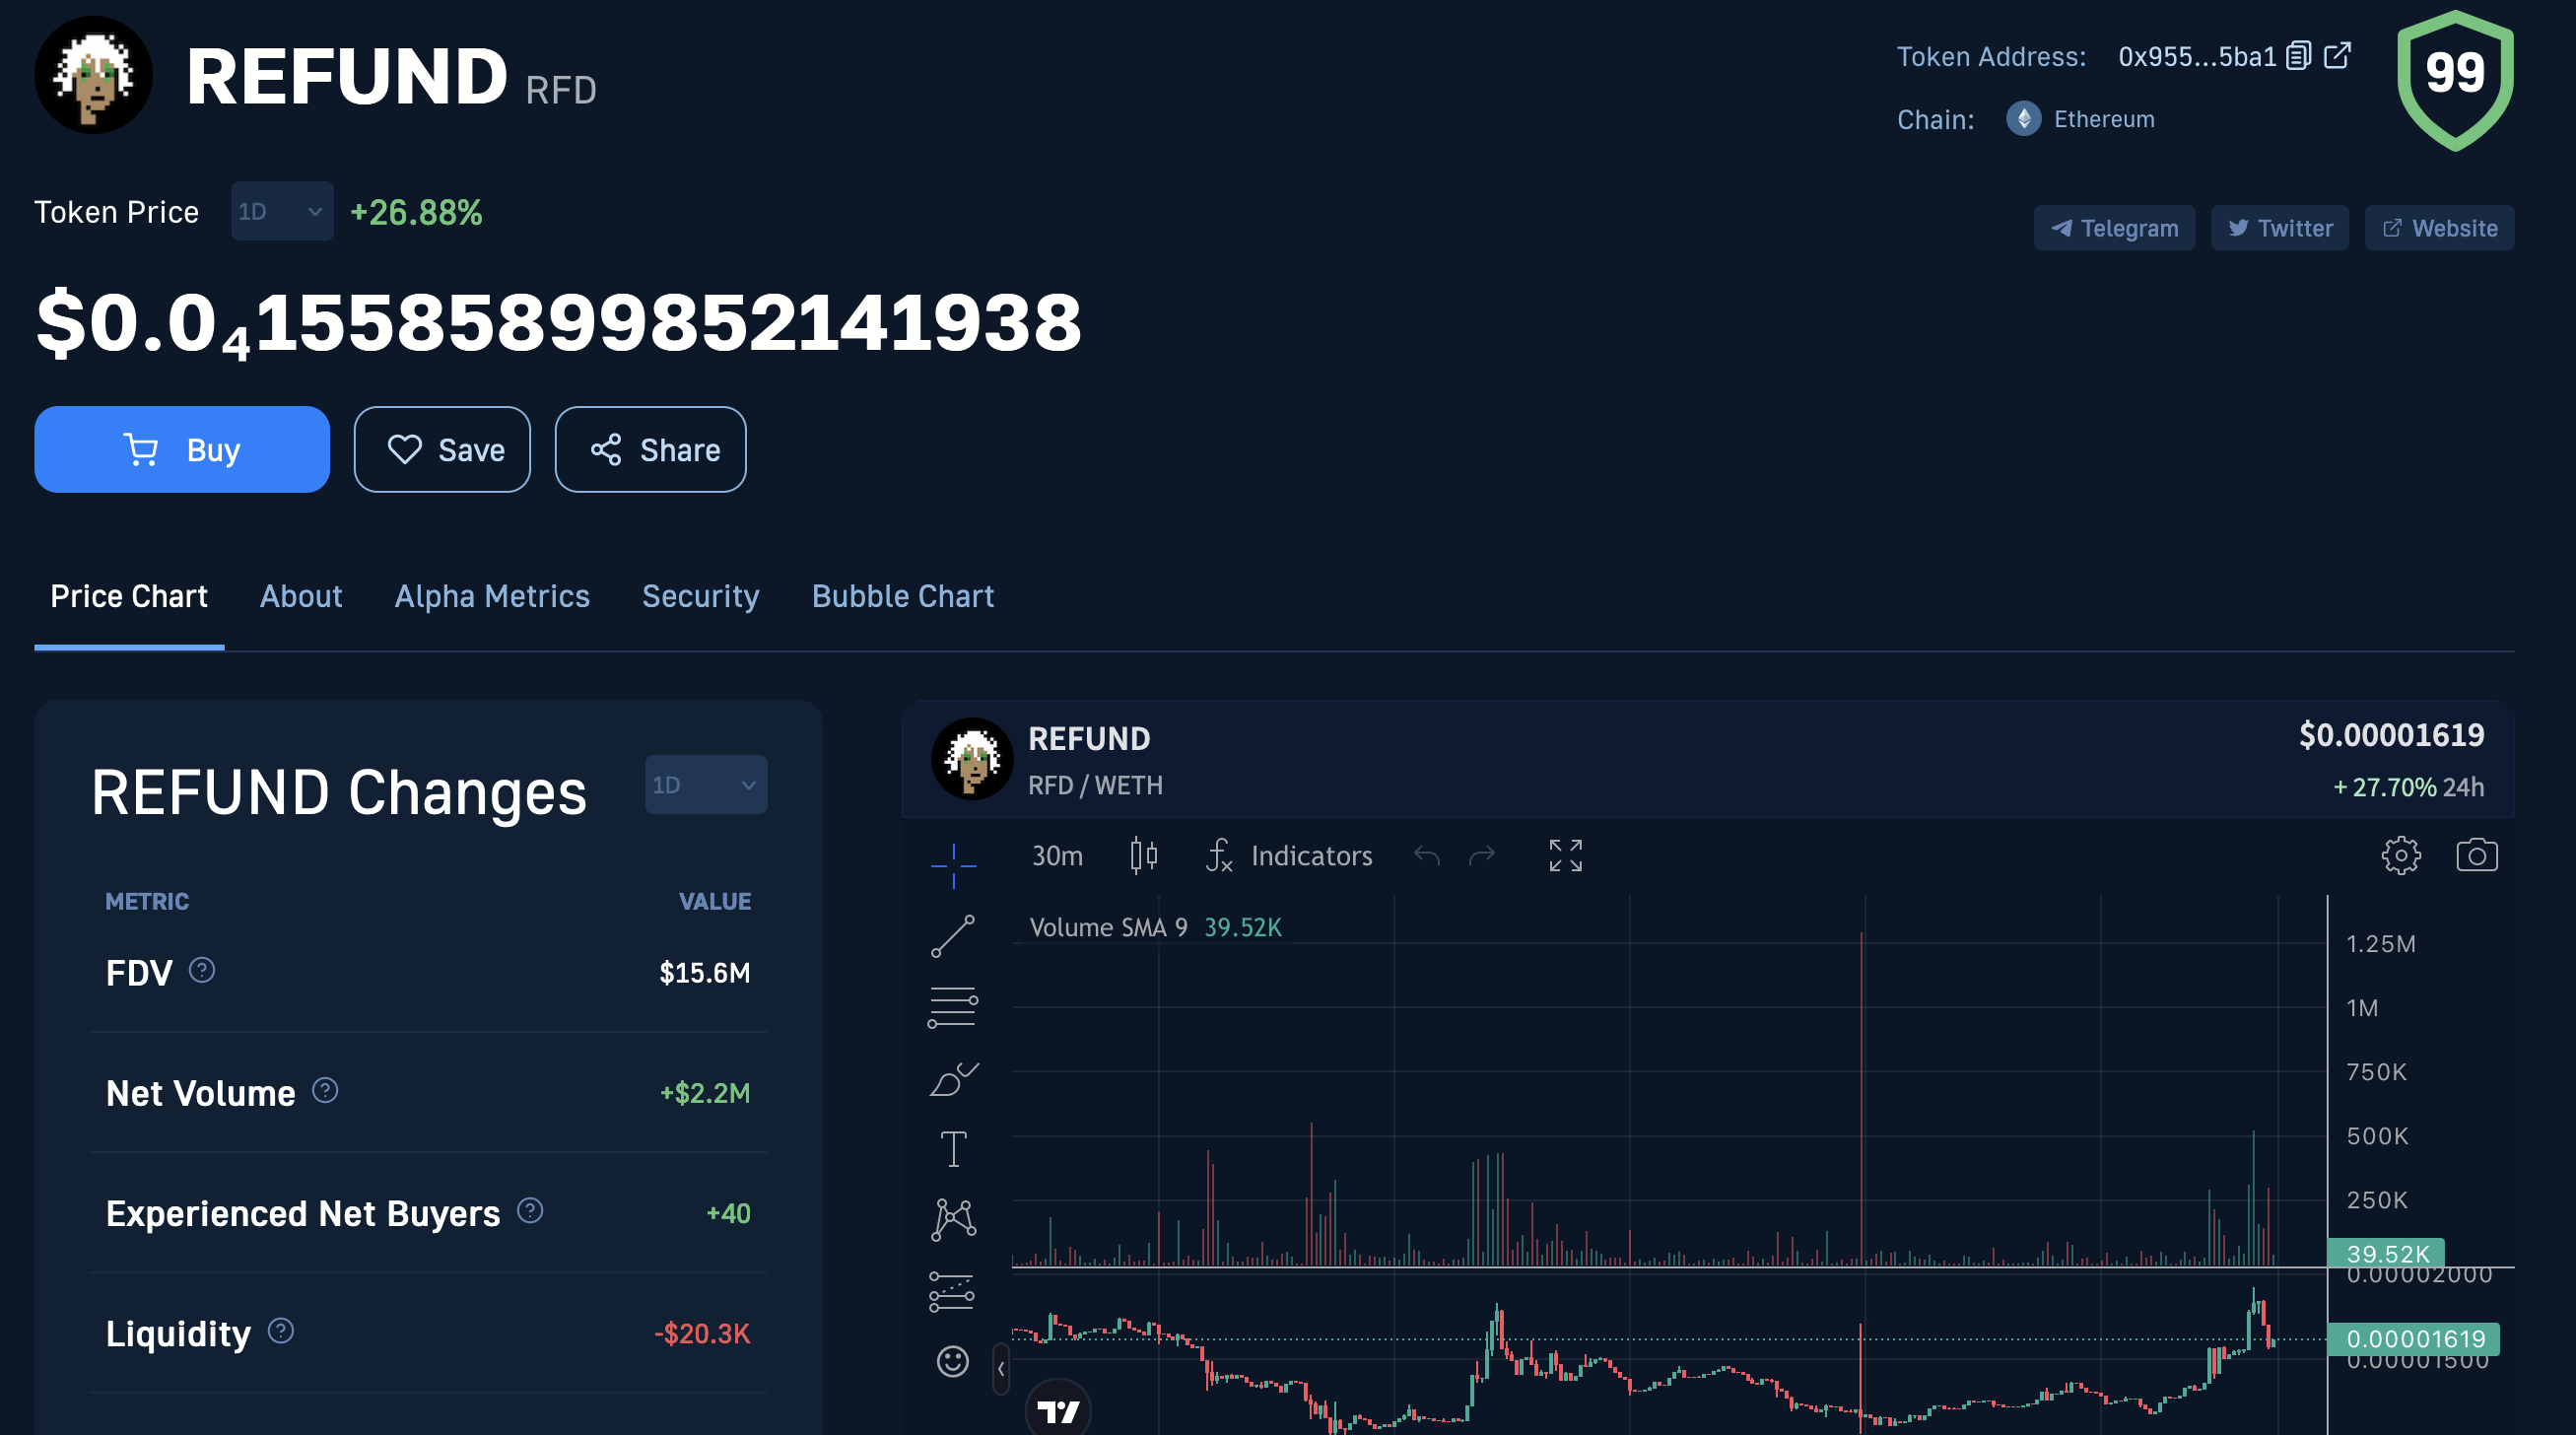 Moralis Money Crypto Trading Tool Showing Cryptocurrency Tokenomics Data for the REFUND Token